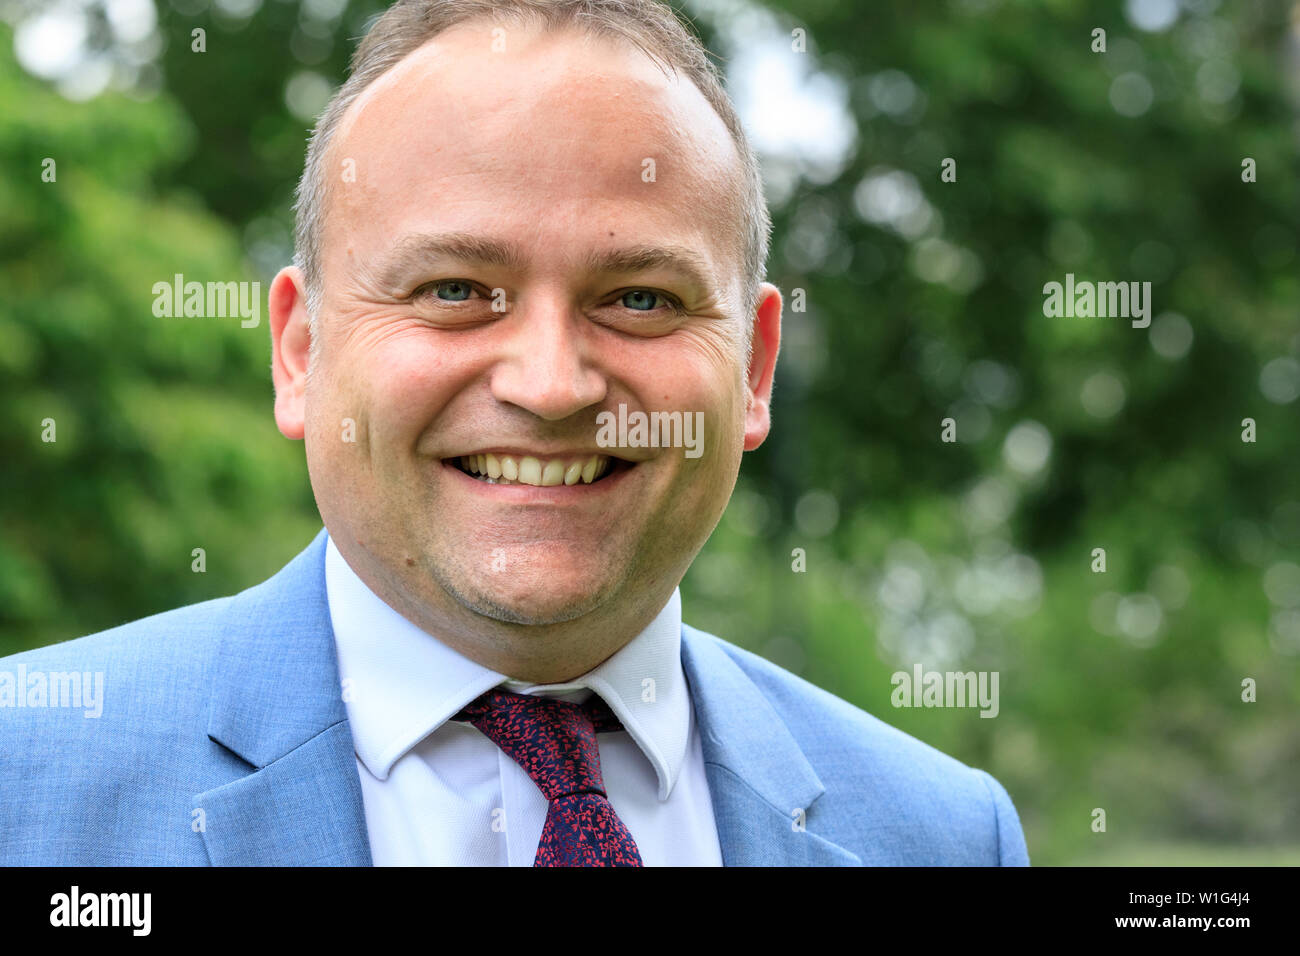 Neil Coyle, MP, Member of Parliament for Bermondsey & Old Southwark, British Labour Party politician in London, UK Stock Photo